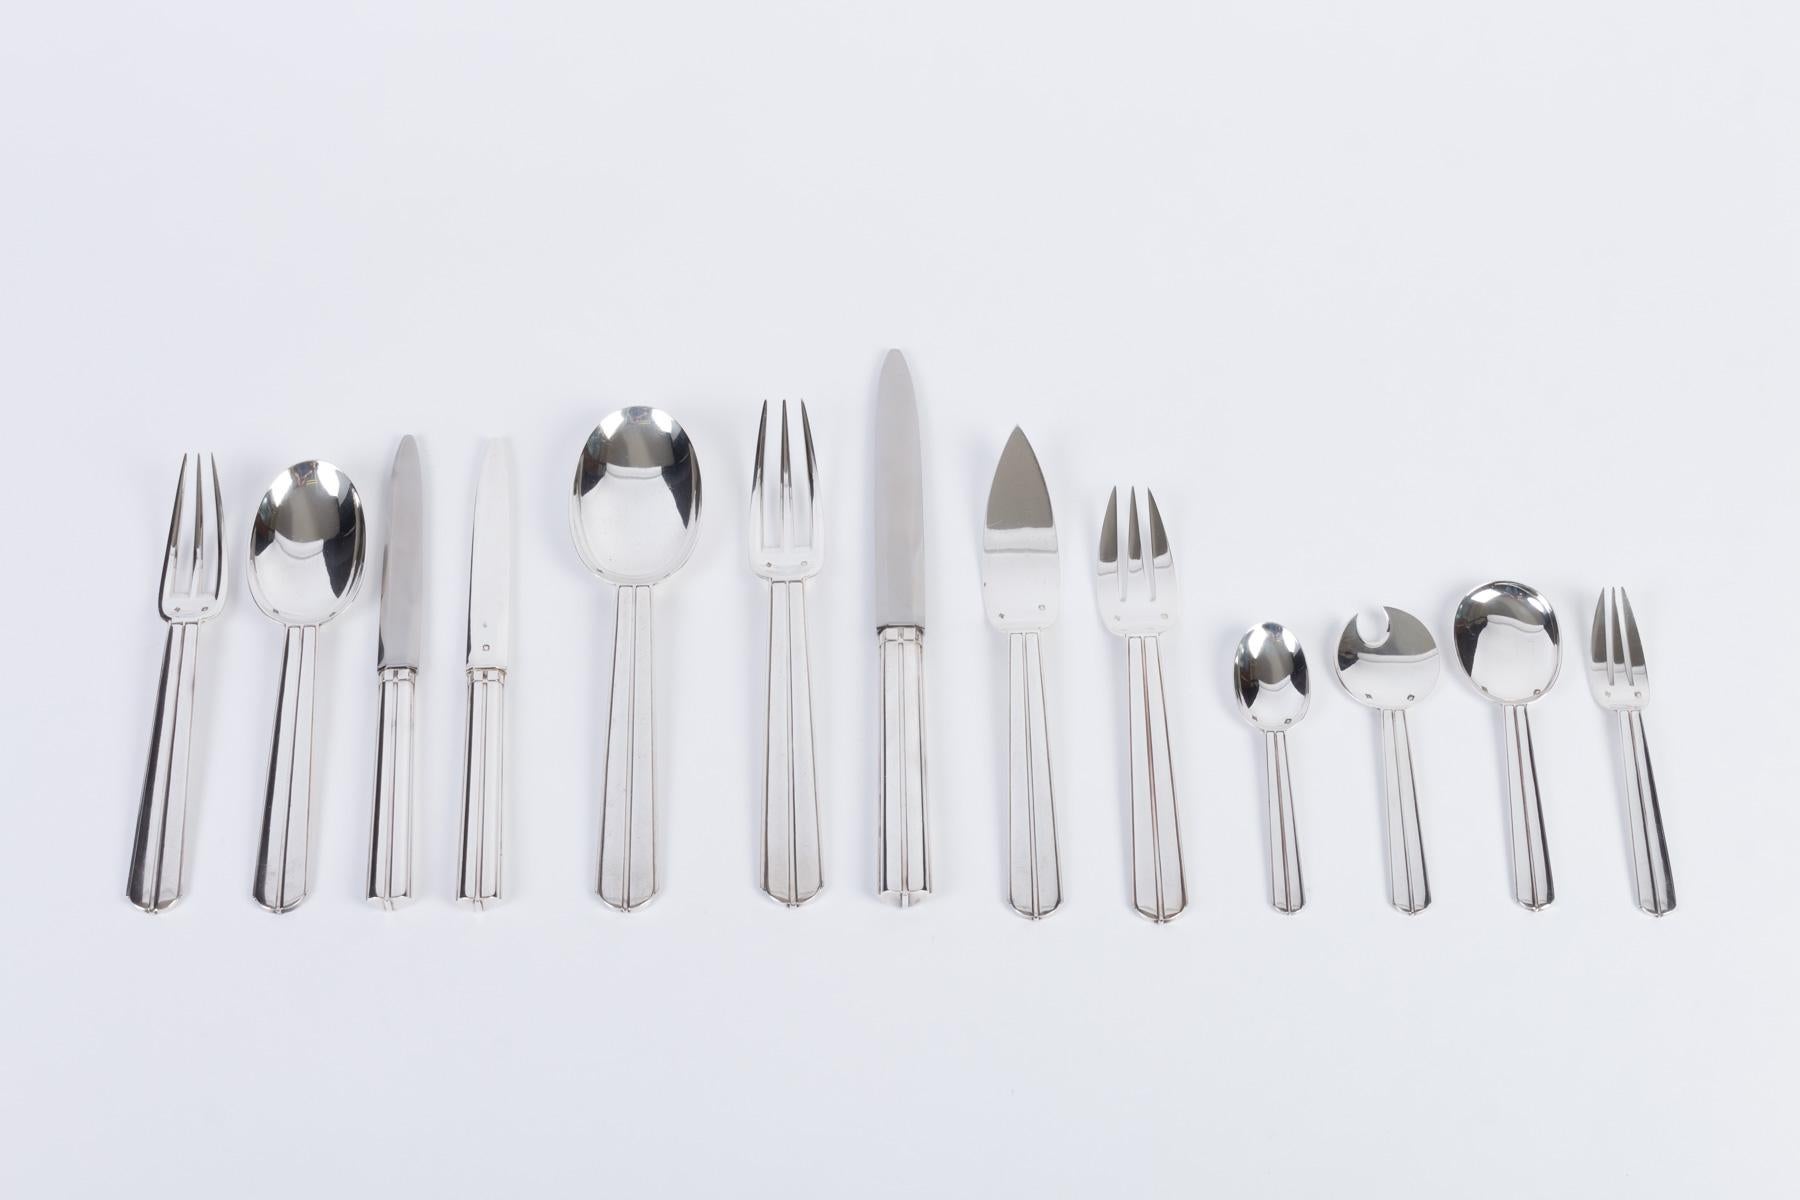 Monogrammed MM

Composed of 196 pieces - 14960 g

12 Jean Puiforcat silk steel steak knives with 12 steak knives between the blades
12 knives with silver blade
12 dessert spoons
12 forks with entremet
12 mocha spoons
12 ice cream spoons
12